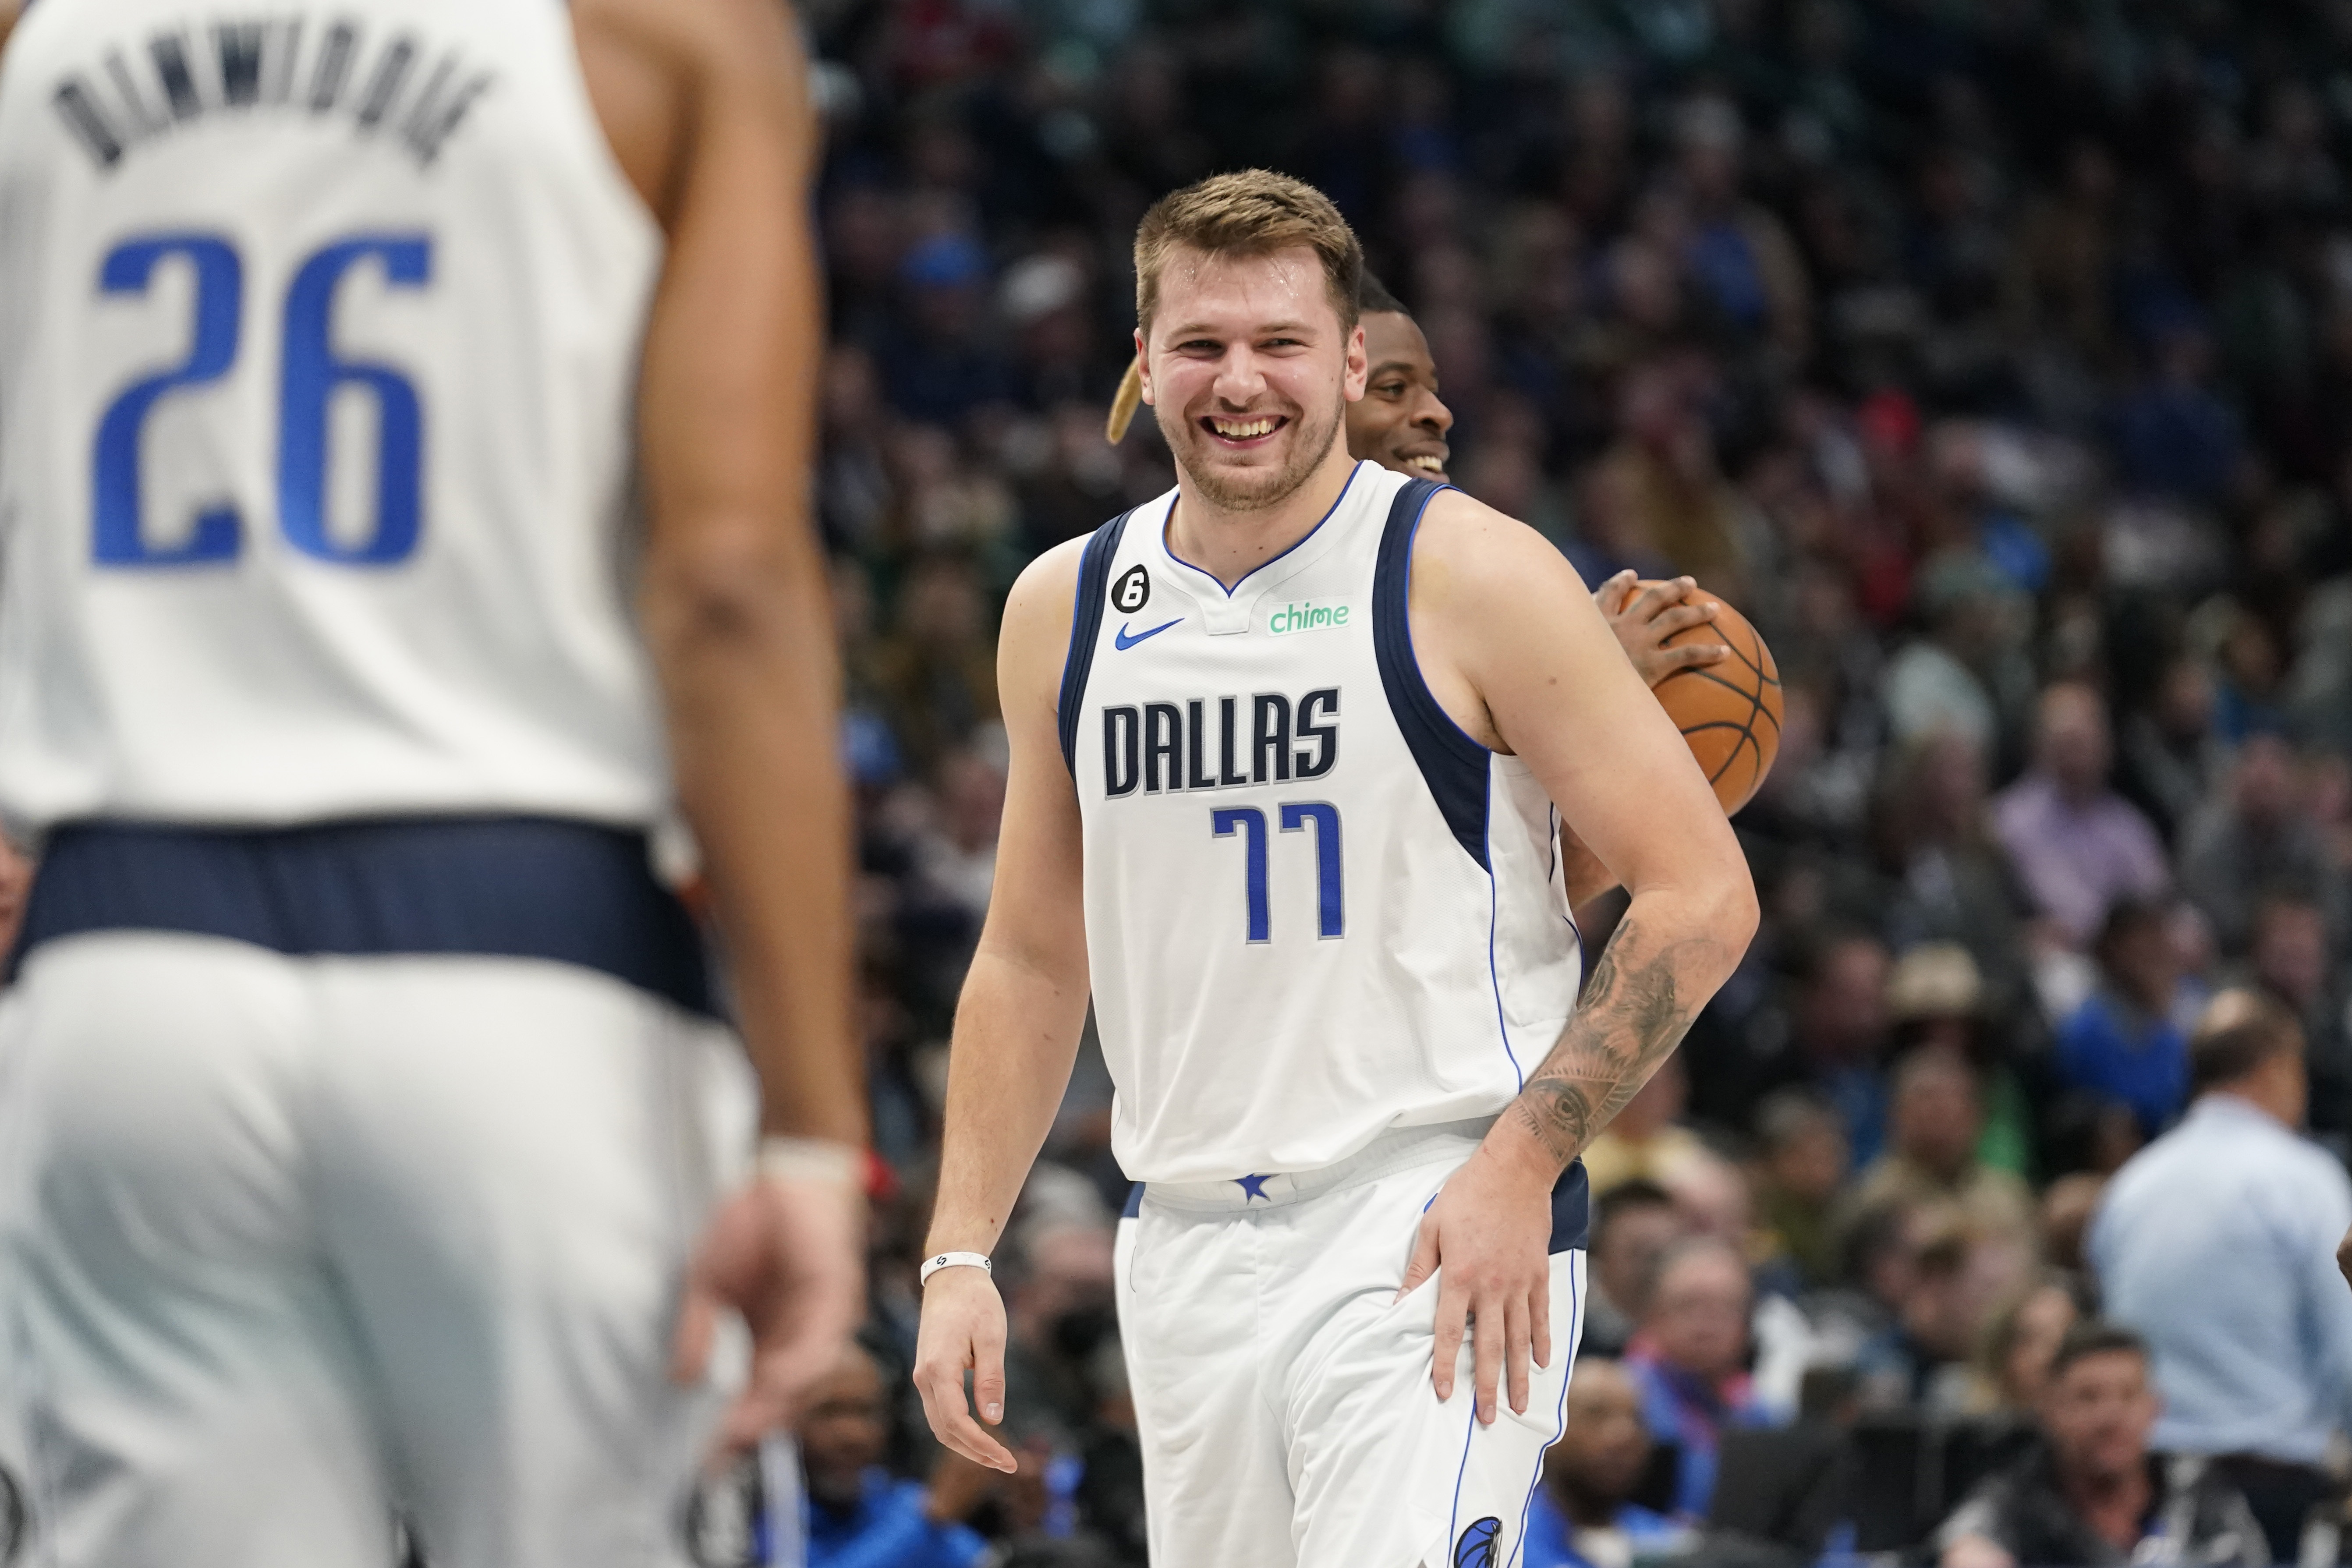 Shoulda known Luka was dropping 50 when he pulled up in the new whip :  r/Mavericks